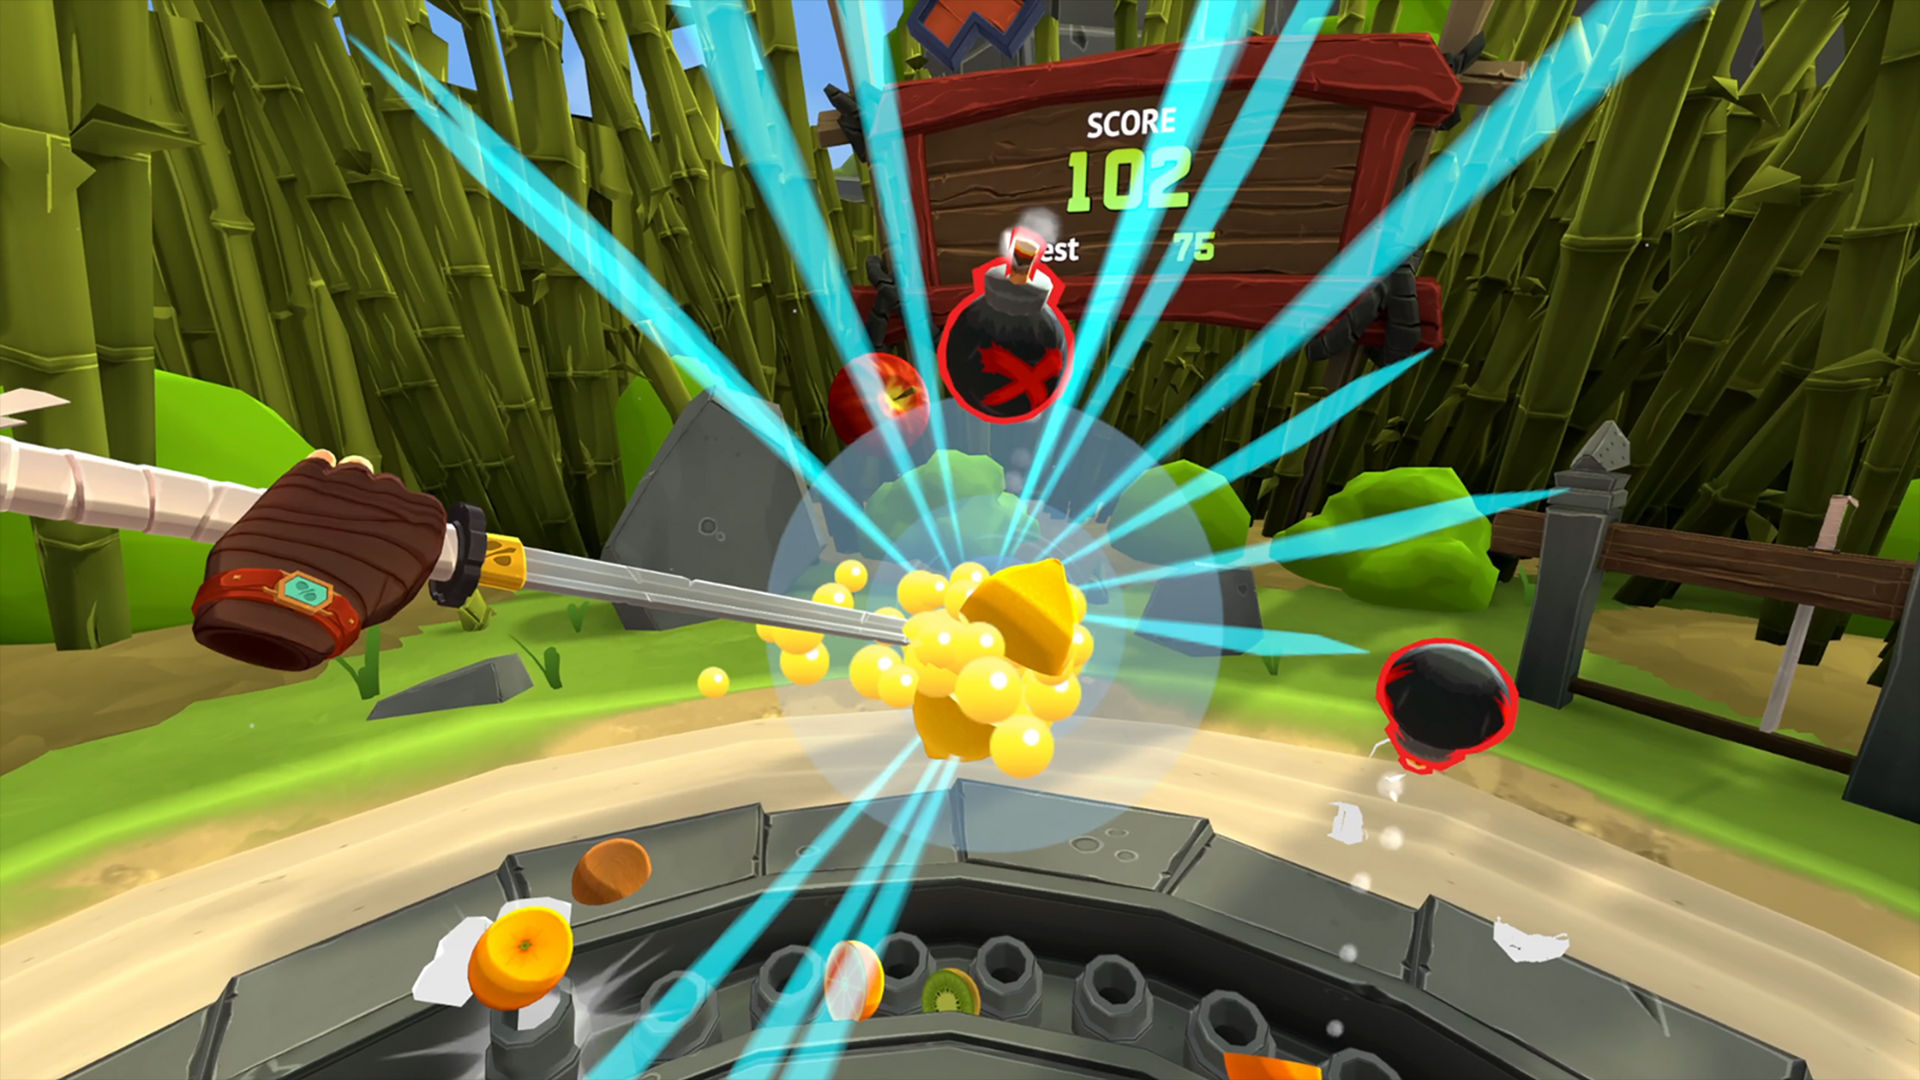 Fruit Ninja VR 2 Sets Dec 3 Early Access Release For PC VR, Quest App Lab  In 2022